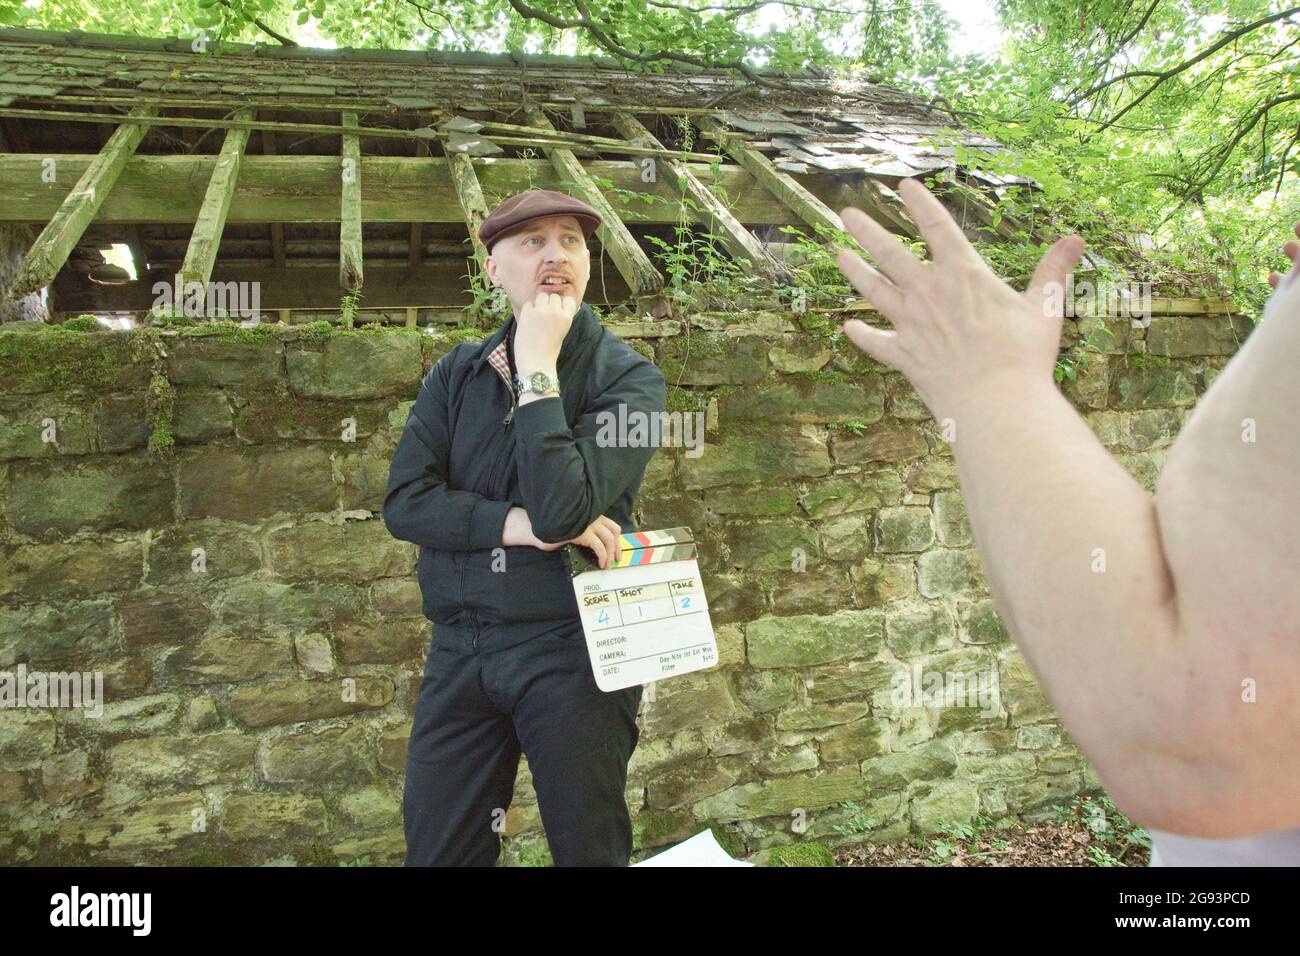 Sheffield, UK - 17 July 2017 : David Cracker & Barbara Bentley in creative discussion on location filming Meltdown by Wellred Films at Eccleshall Wood Stock Photo